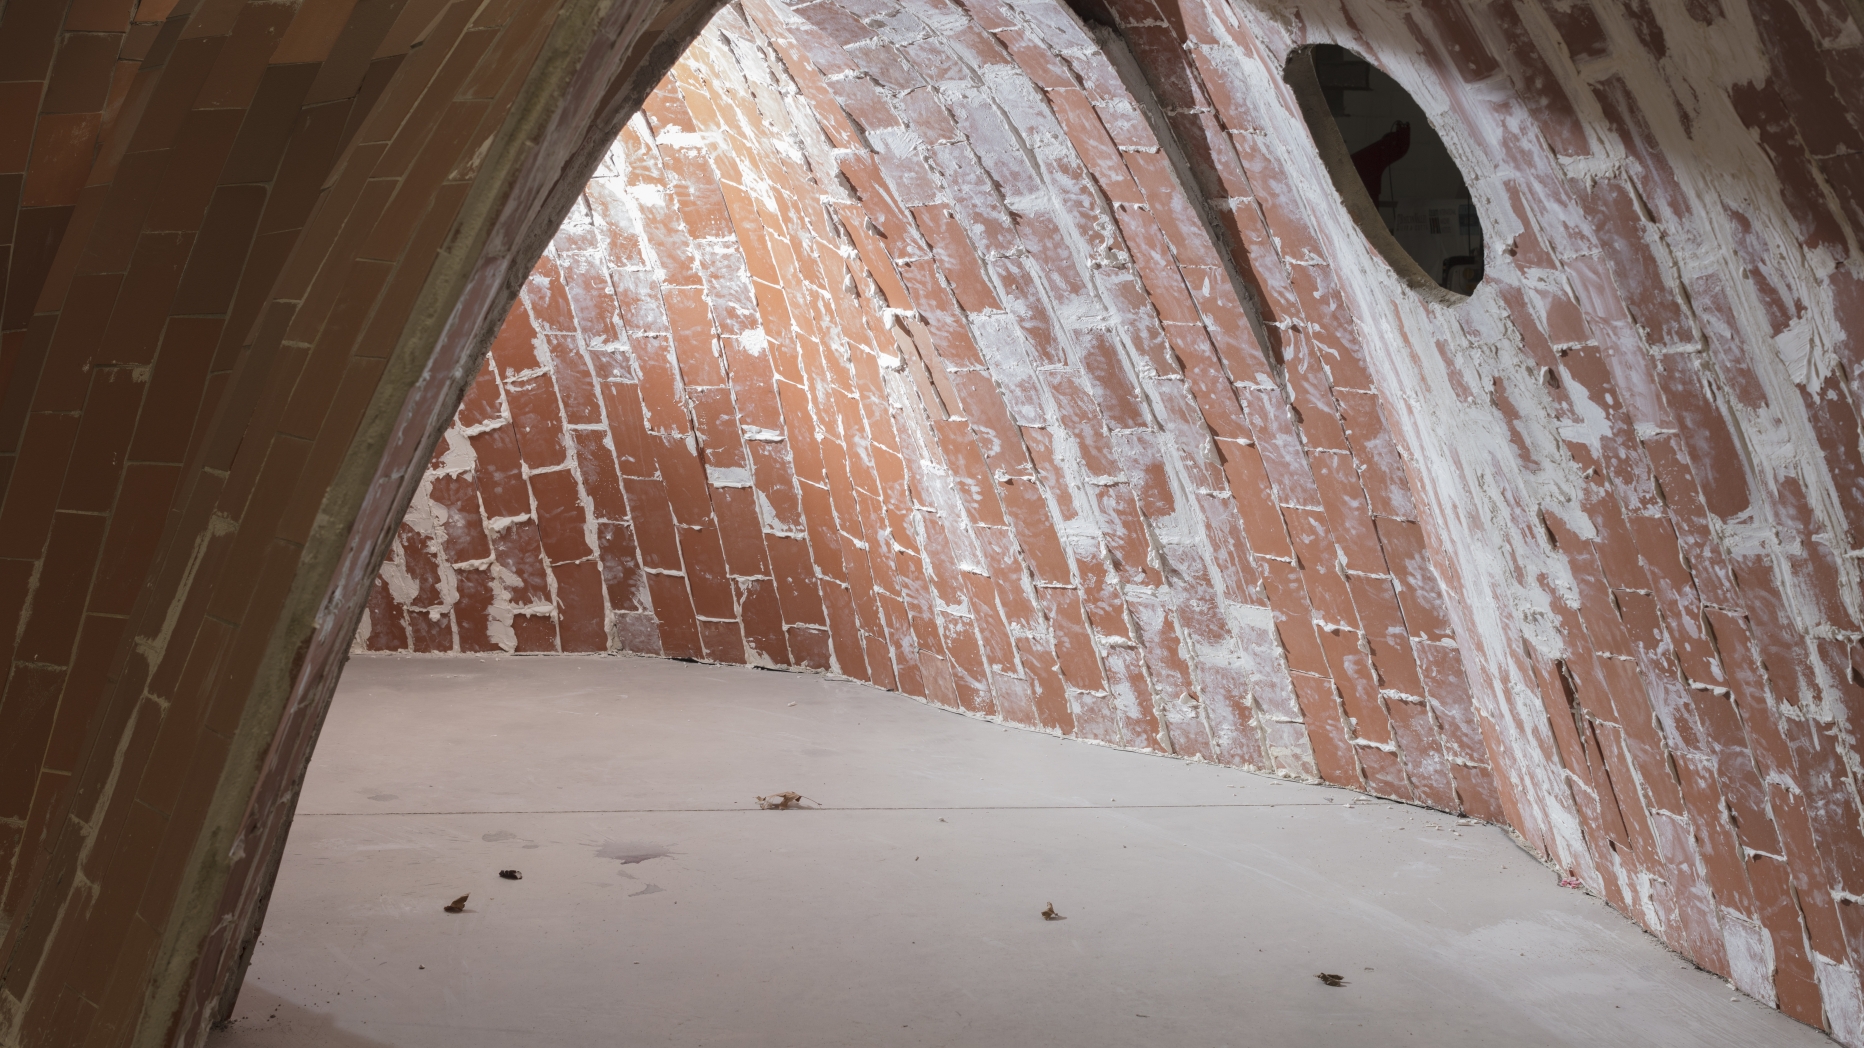 Arched brick tunnel structure